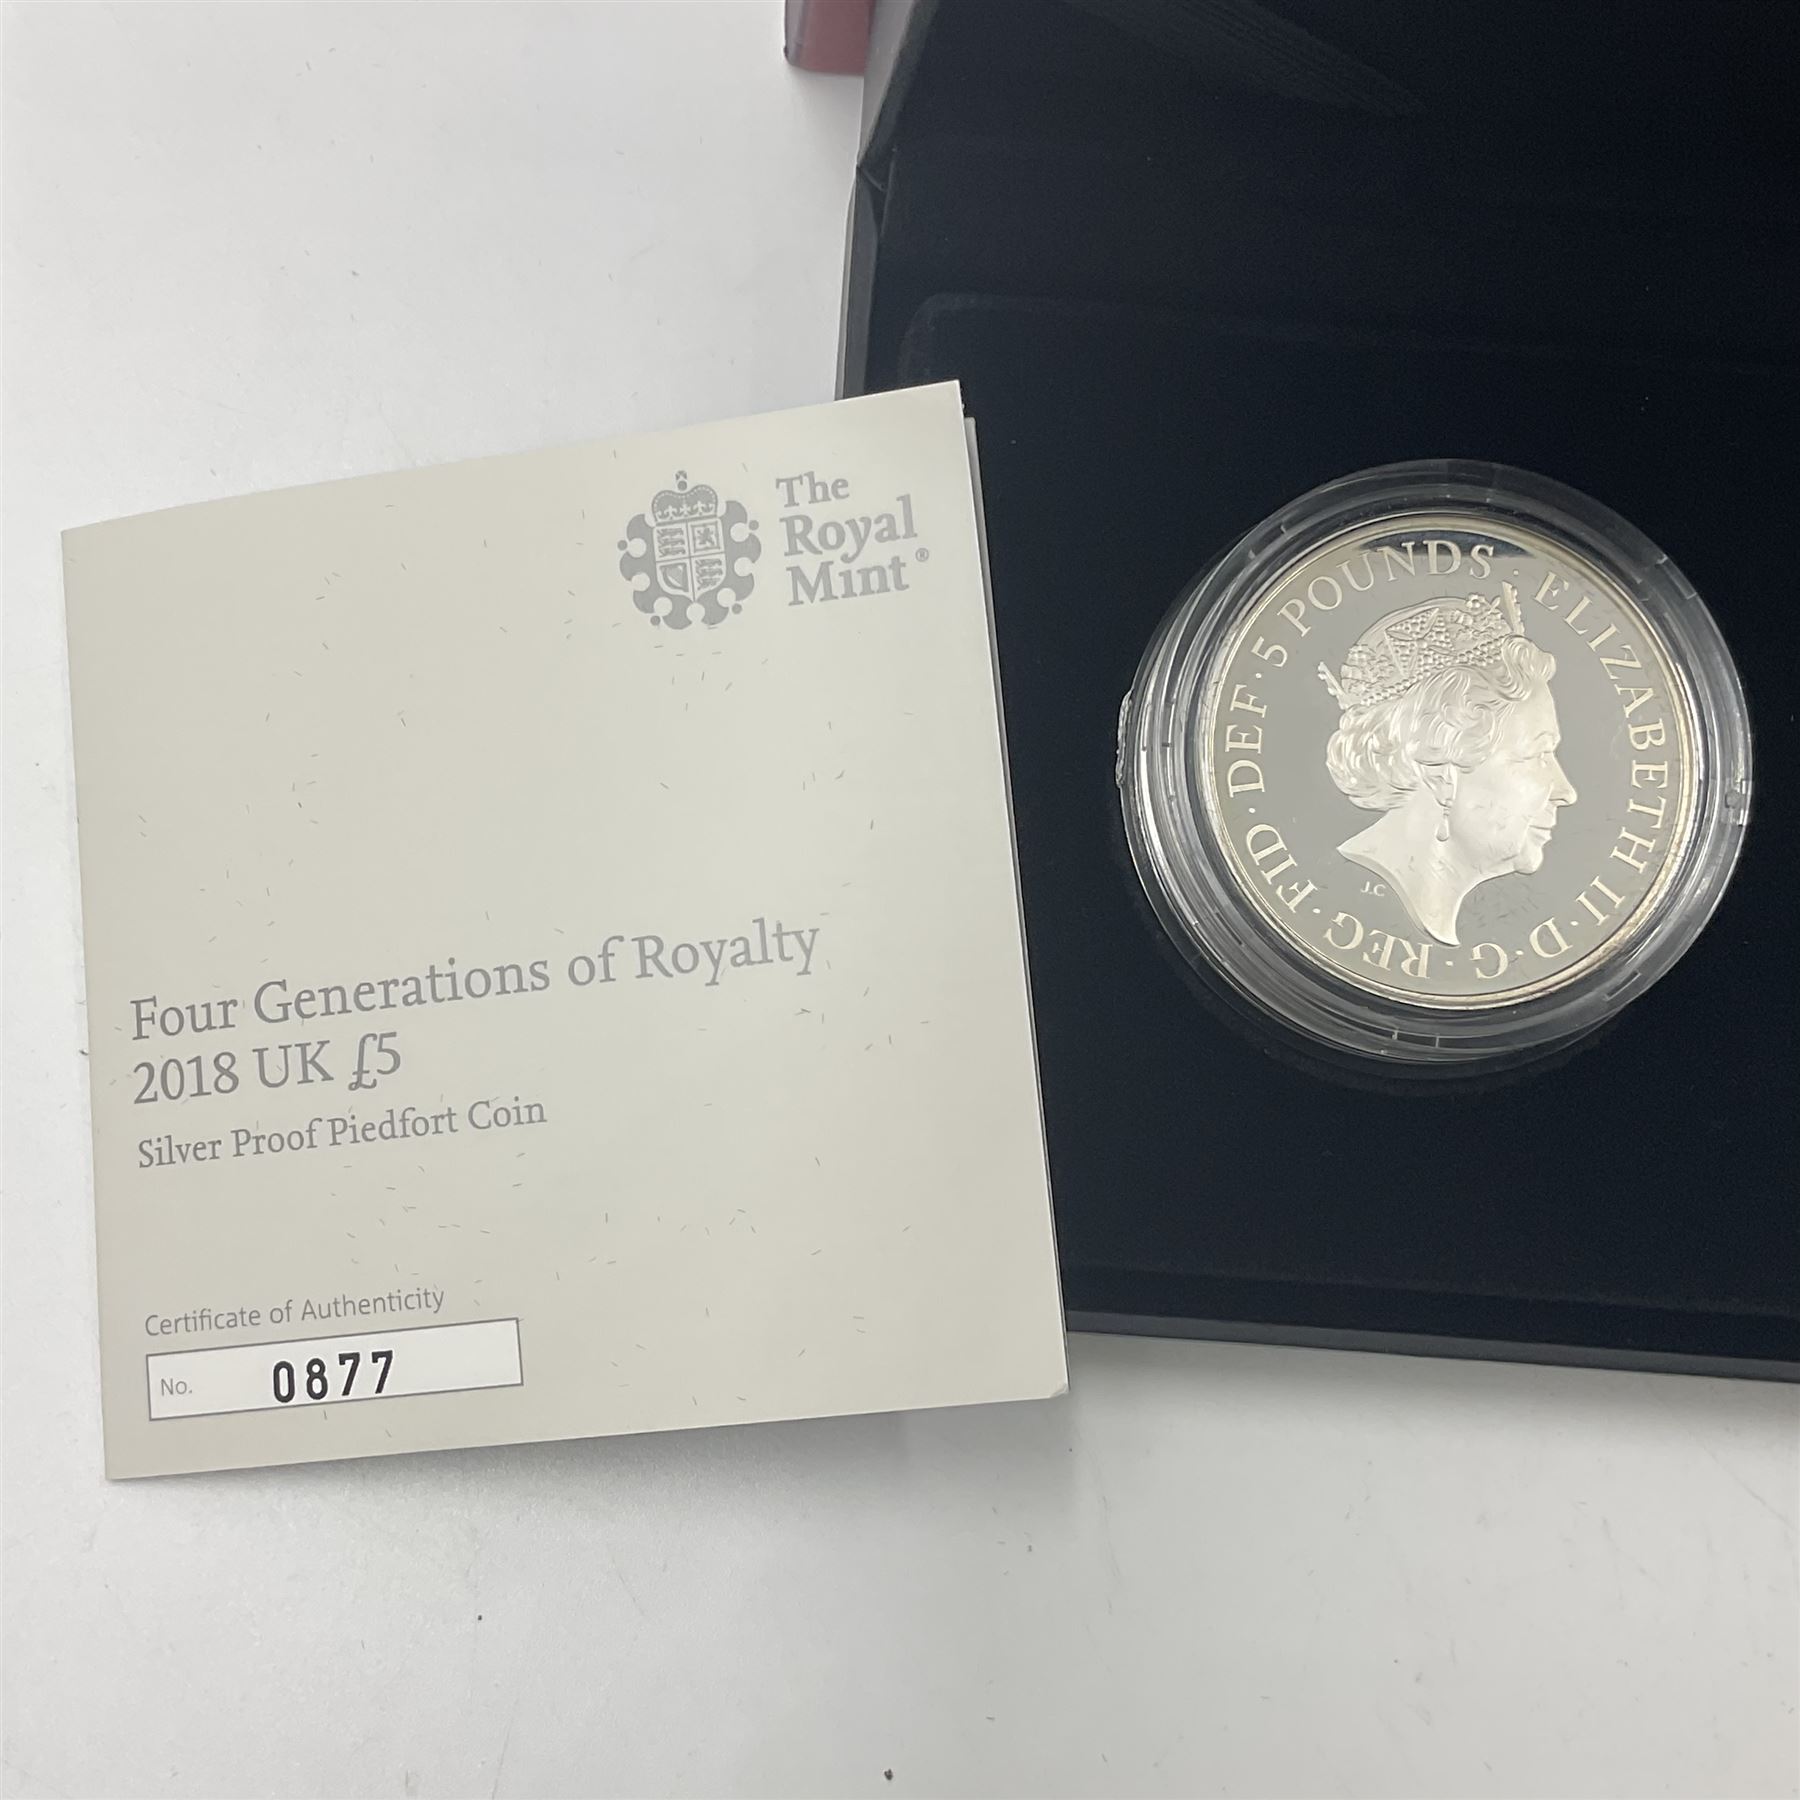 Five The Royal Mint United Kingdom 2018 silver proof piedfort five pound coins - Image 3 of 16